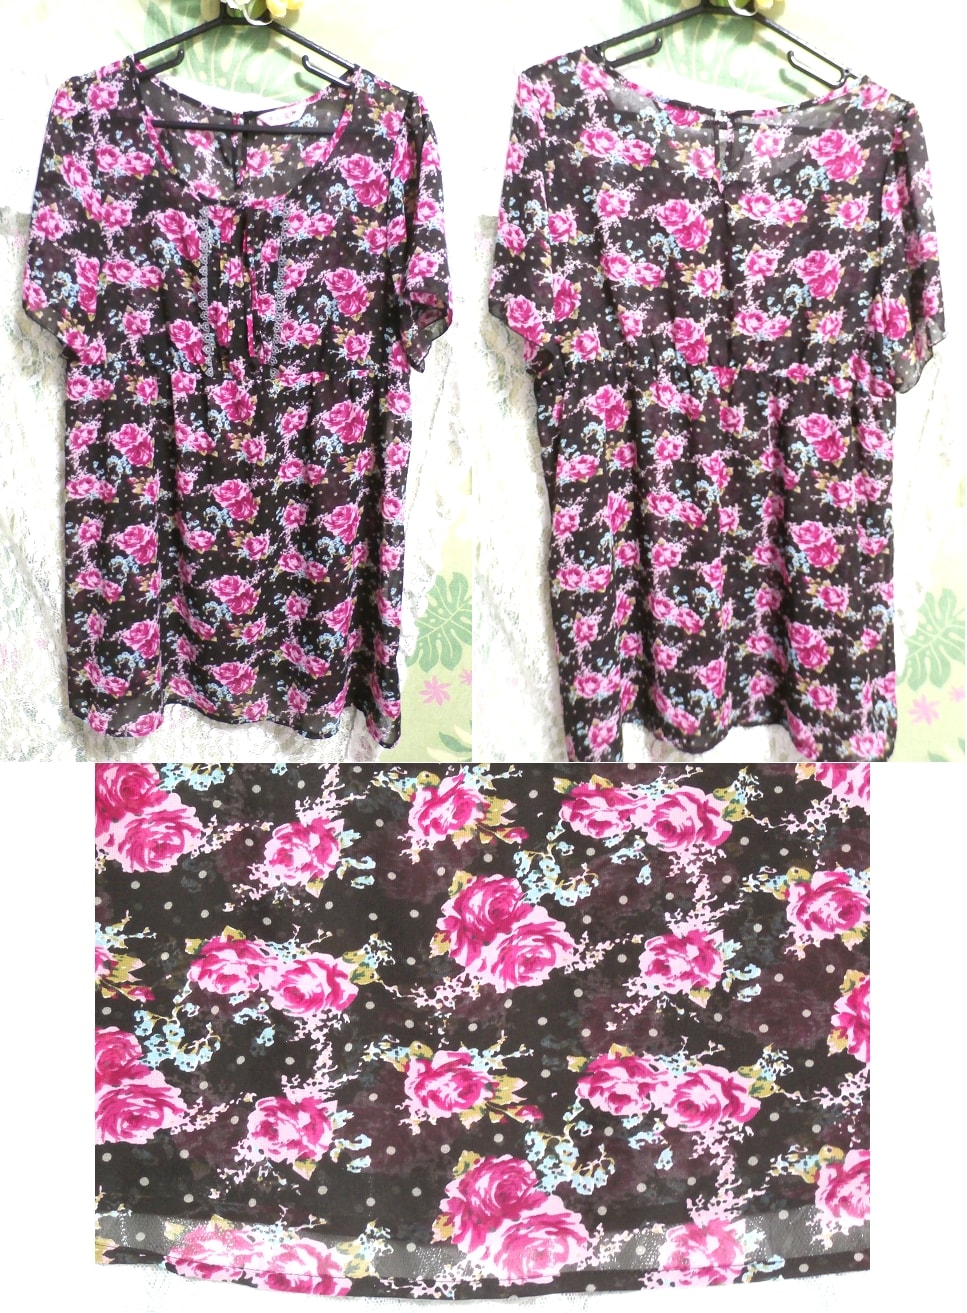 Pink and black rose floral pattern negligee nightgown tunic dress, tunic, short sleeve, xl size and above